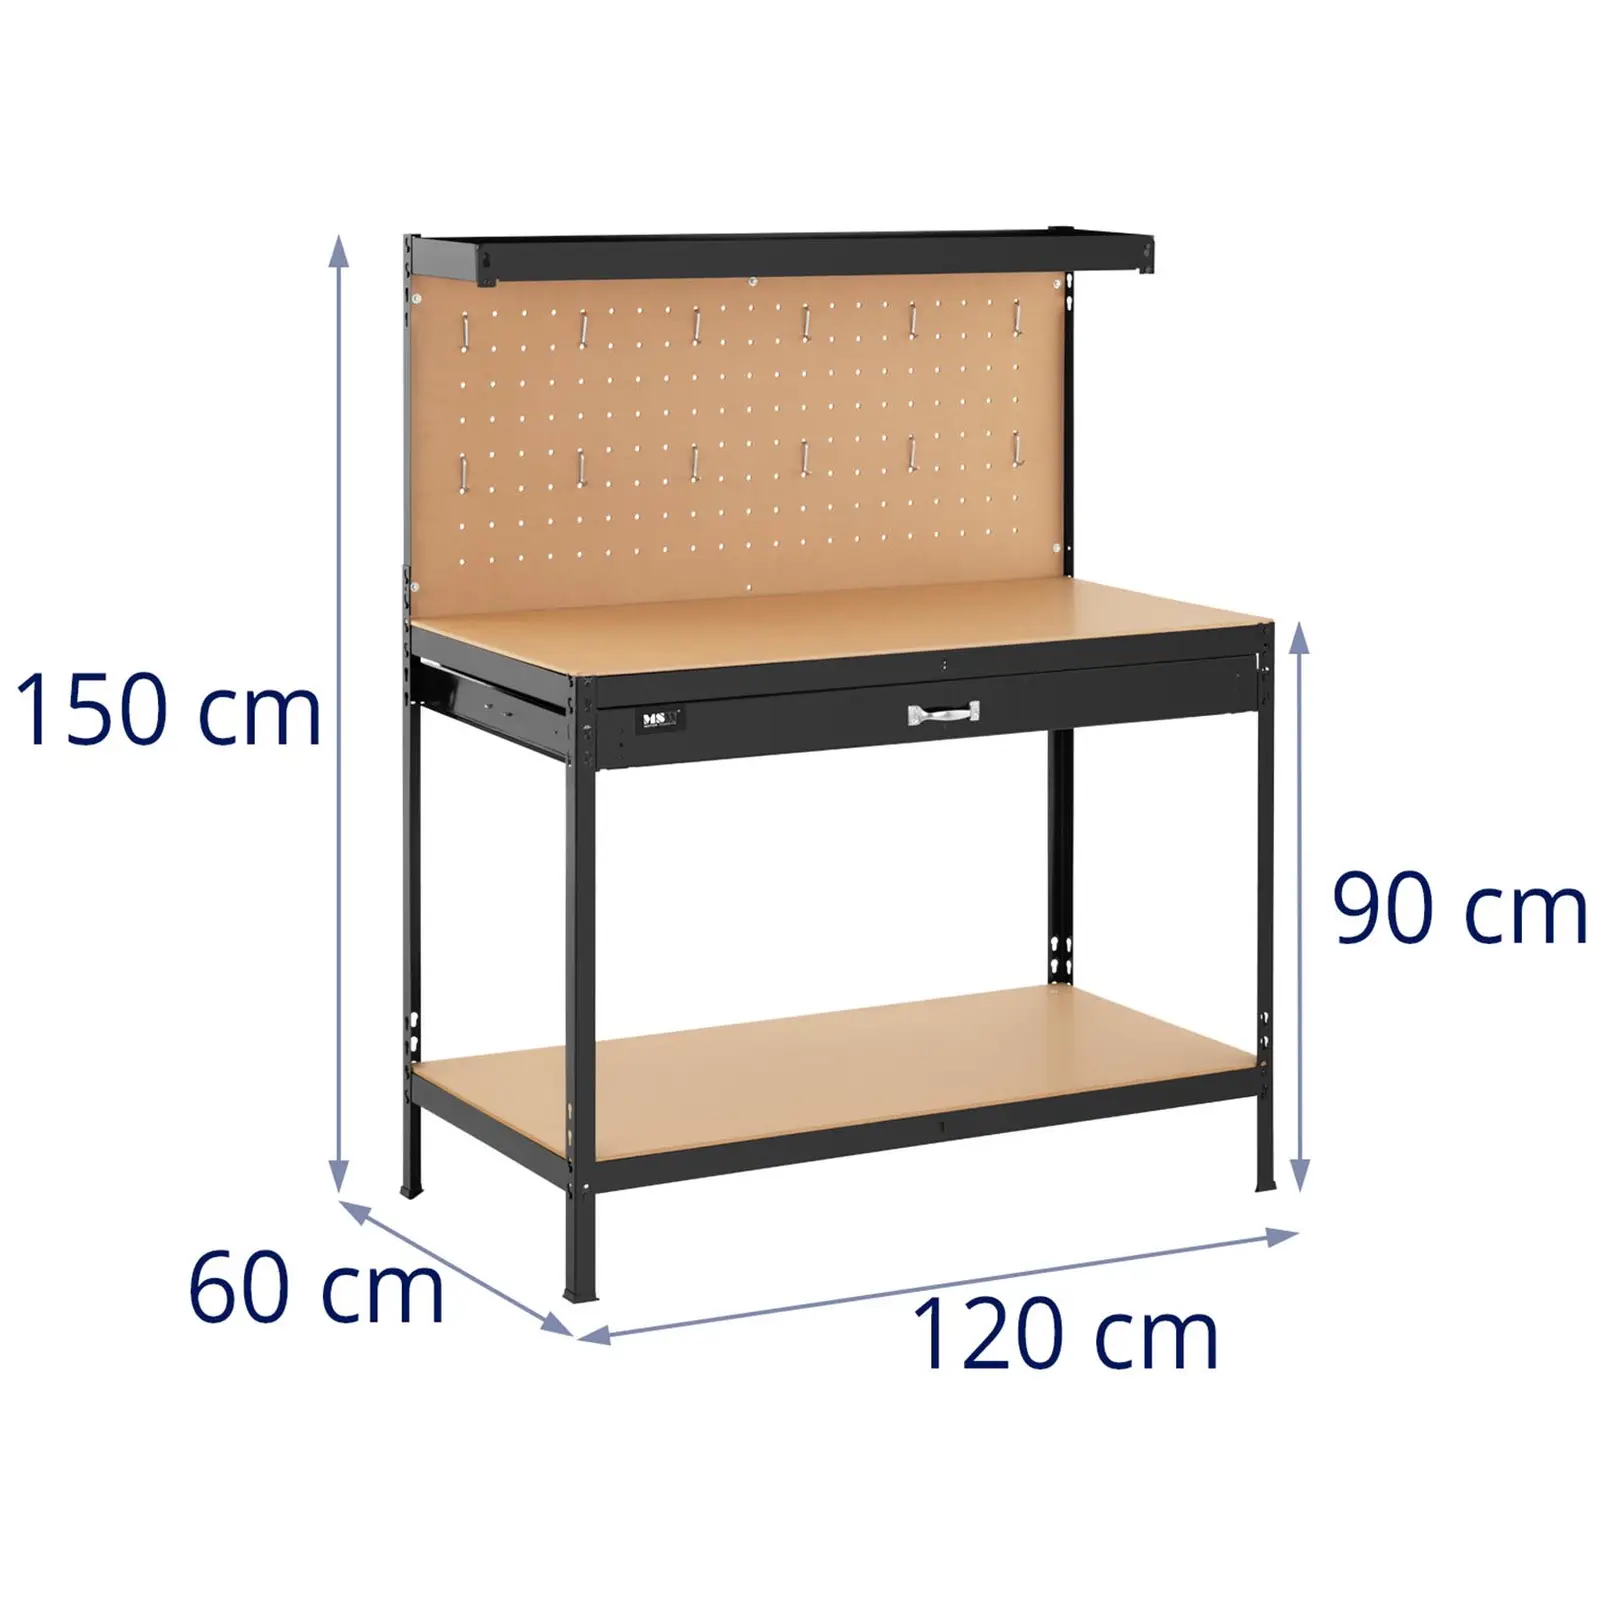 Workbench - with drawer - 230 kg